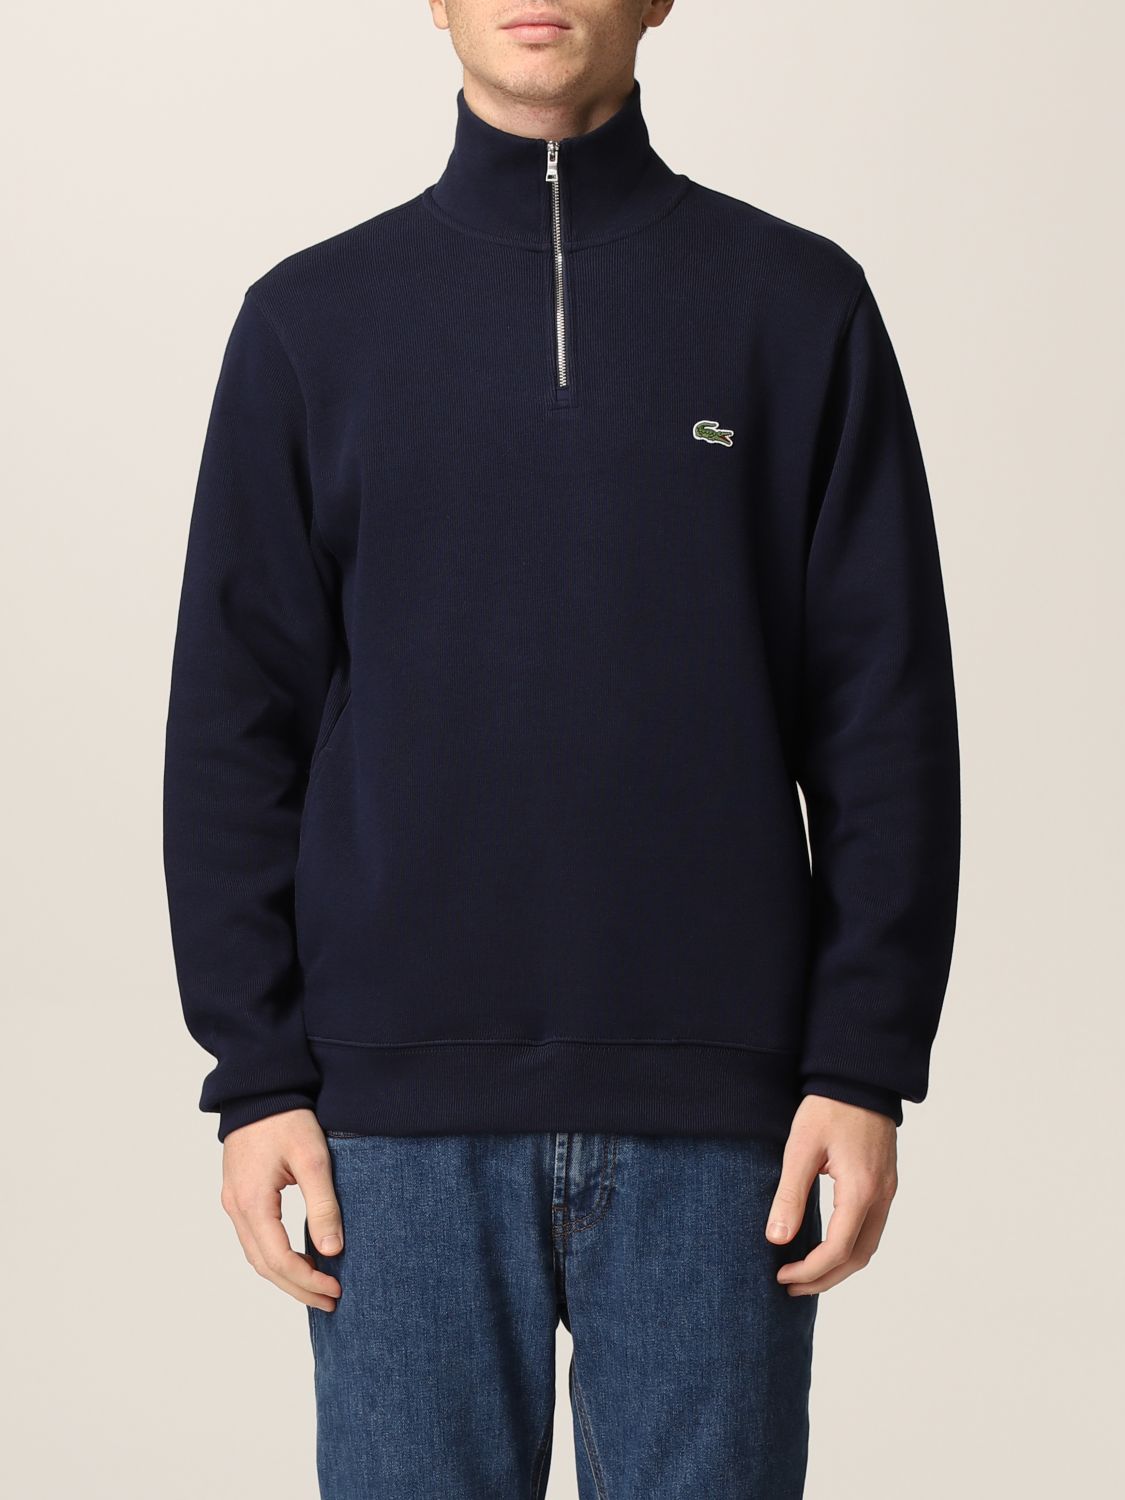 LACOSTE: sweater for man - Blue | Lacoste SH1927 online GIGLIO.COM